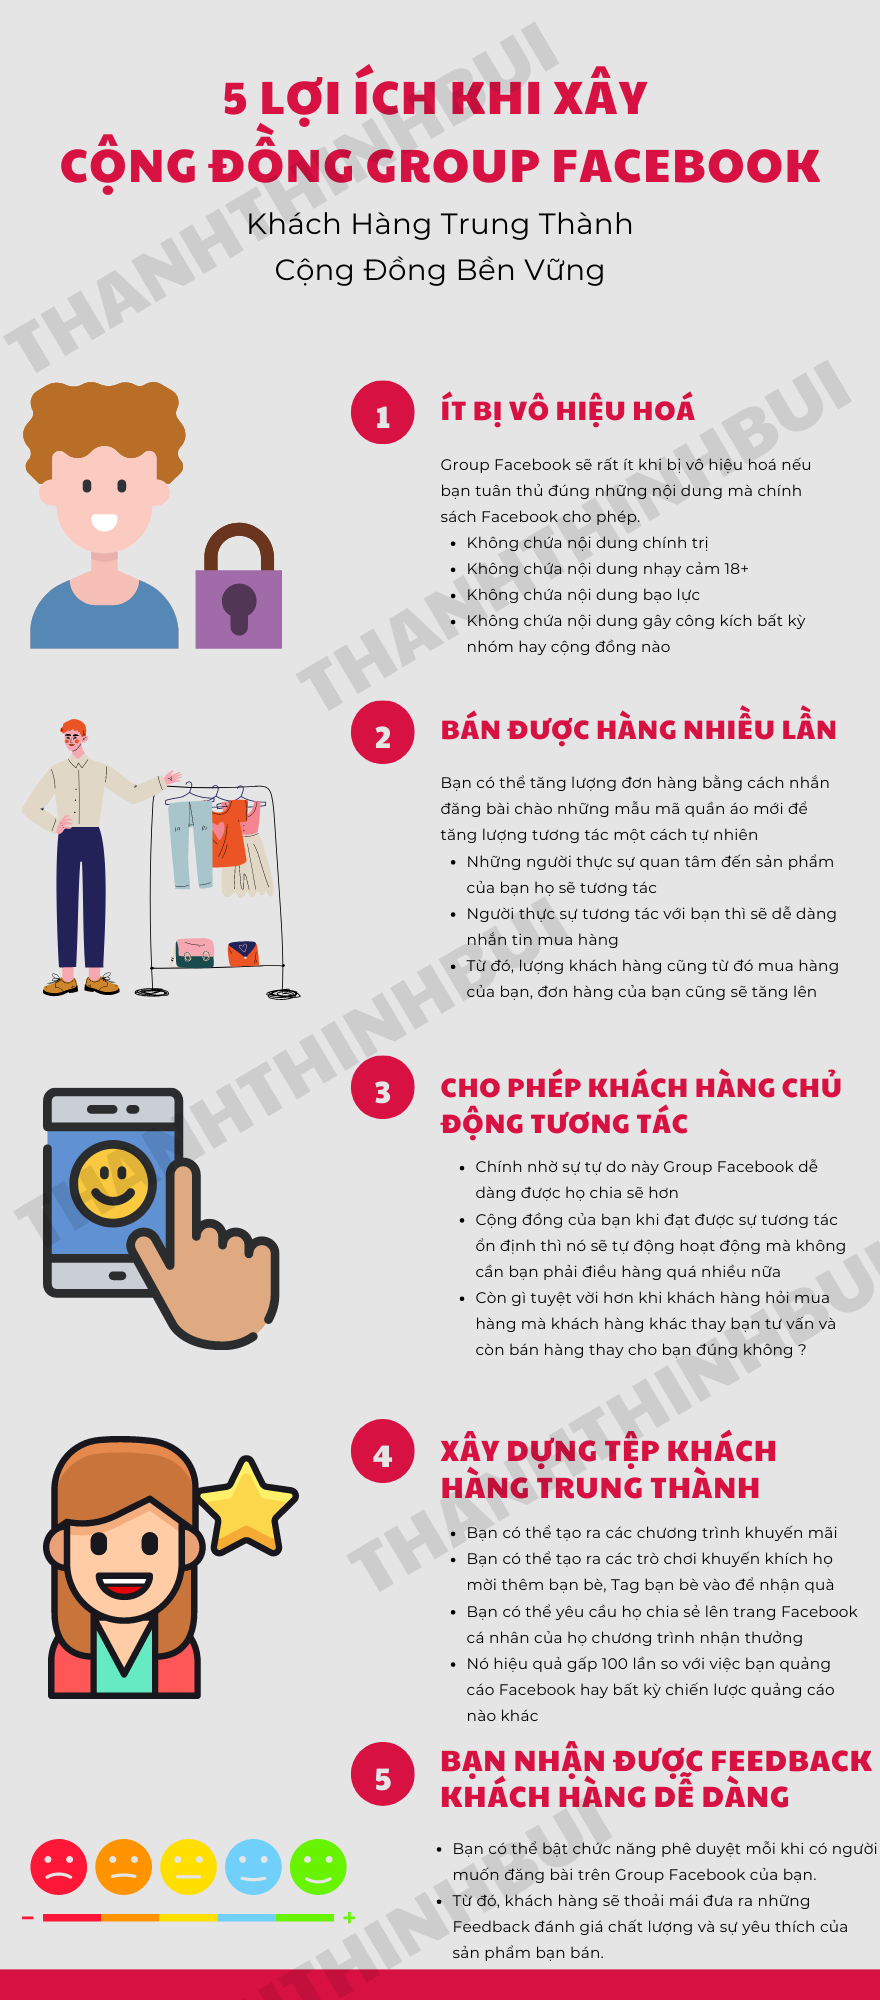 Kinh nghiệm xây dựng Group nội thất Facebook